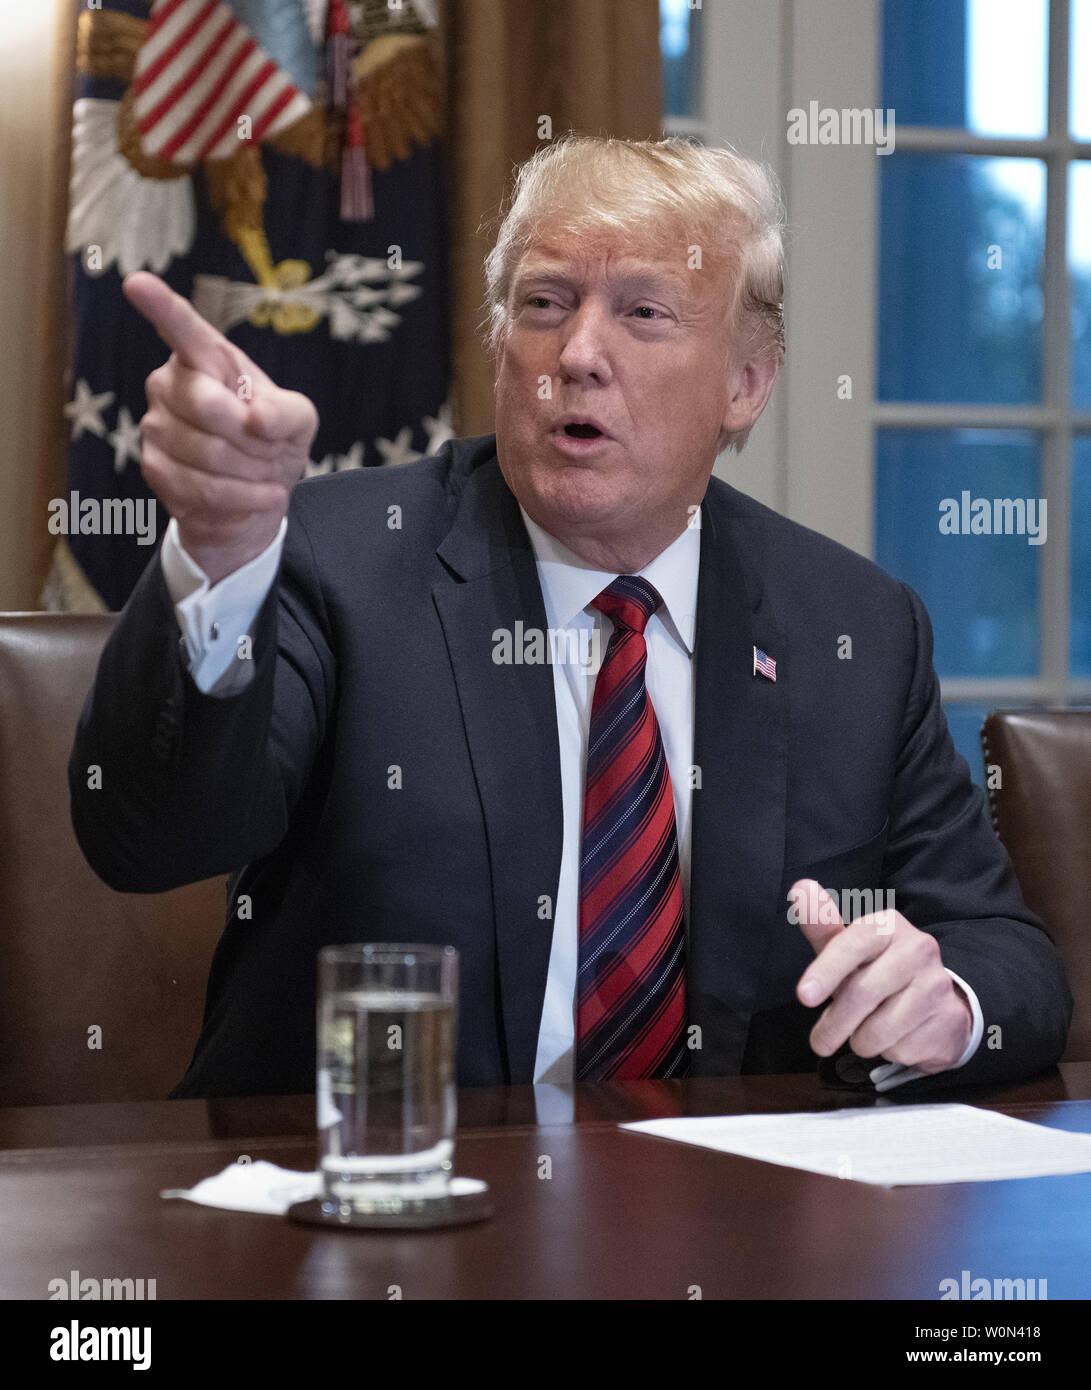 United States President Donald J. Trump makes a statement to the media as he prepares to receive a briefing from senior military leaders in the Cabinet Room of the White House in Washington, DC on Tuesday, October 23, 2018.  The President took questions on the proposed space force, immigration, the caravan and Saudi actions in the killing of Jamal Khashoggi.   Photo by Ron Sachs/UPI Stock Photo